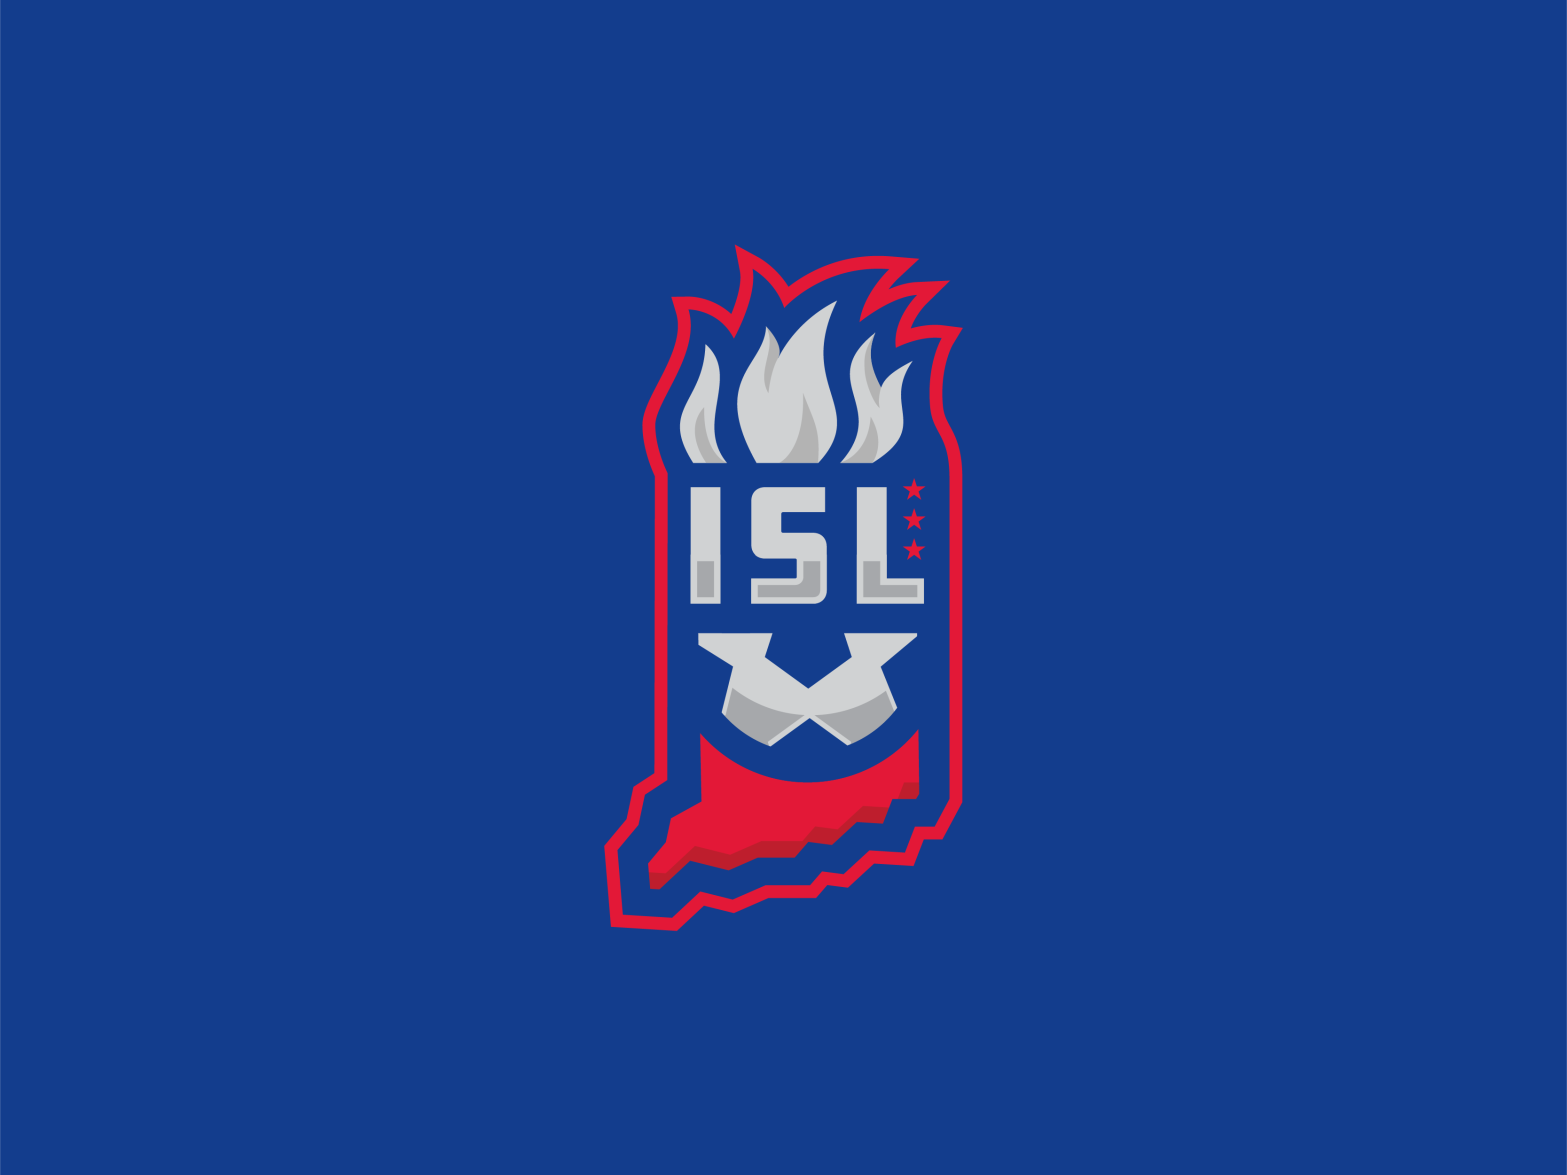 Indiana Soccer League Identity Design by Taylor Howenstine on Dribbble